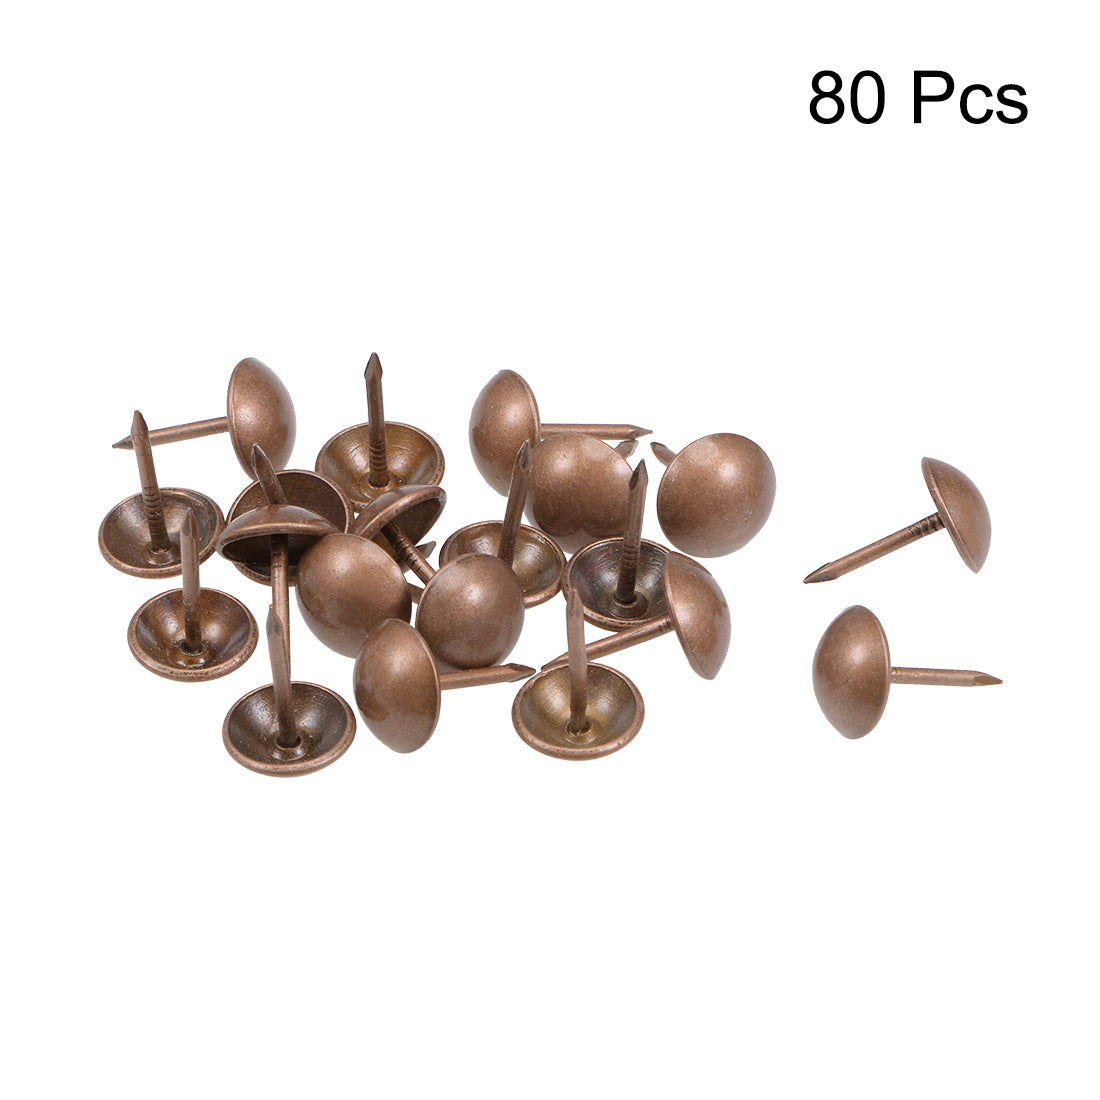 uxcell Uxcell Upholstery Nails Tacks 19mm Head Dia Antique Round Thumb Push Pins Copper Tone 80 Pcs